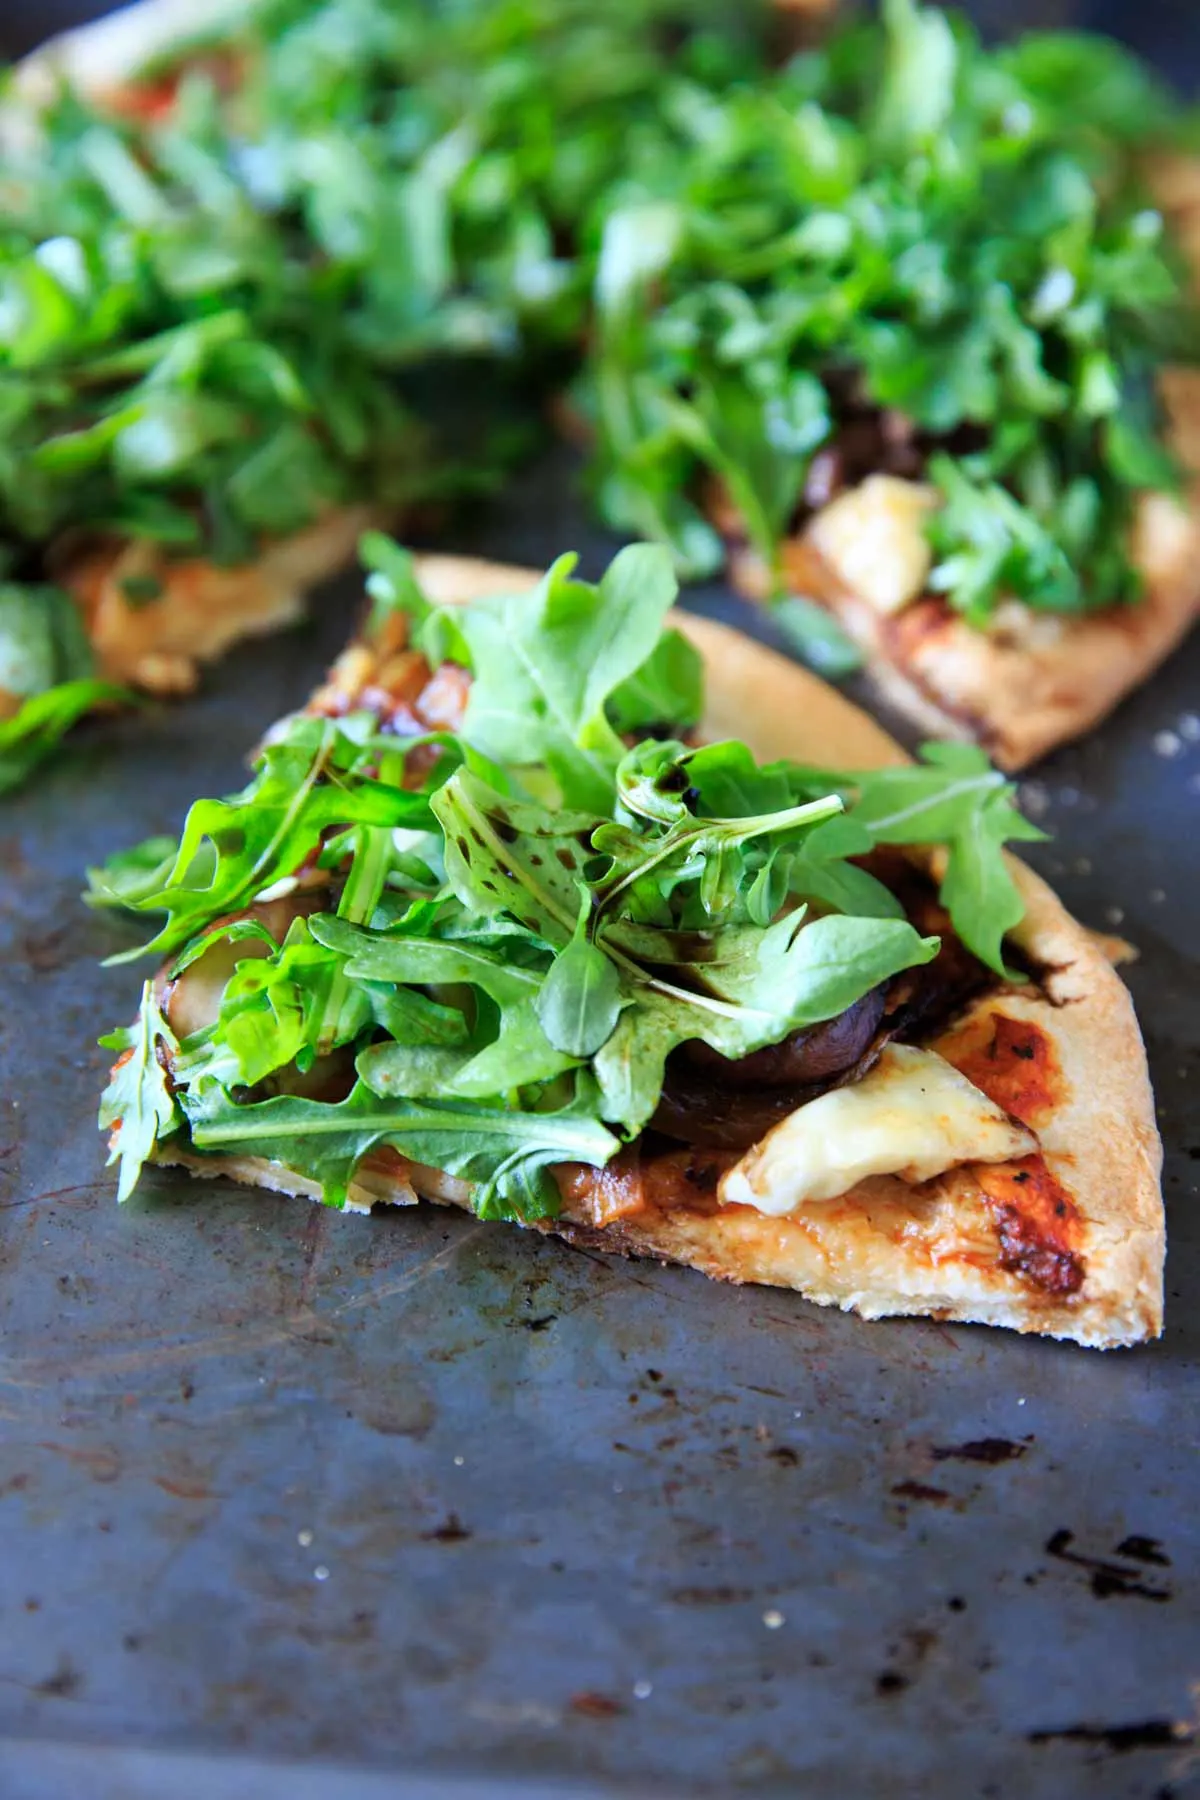 Slice of pizza with arugula leaves on top